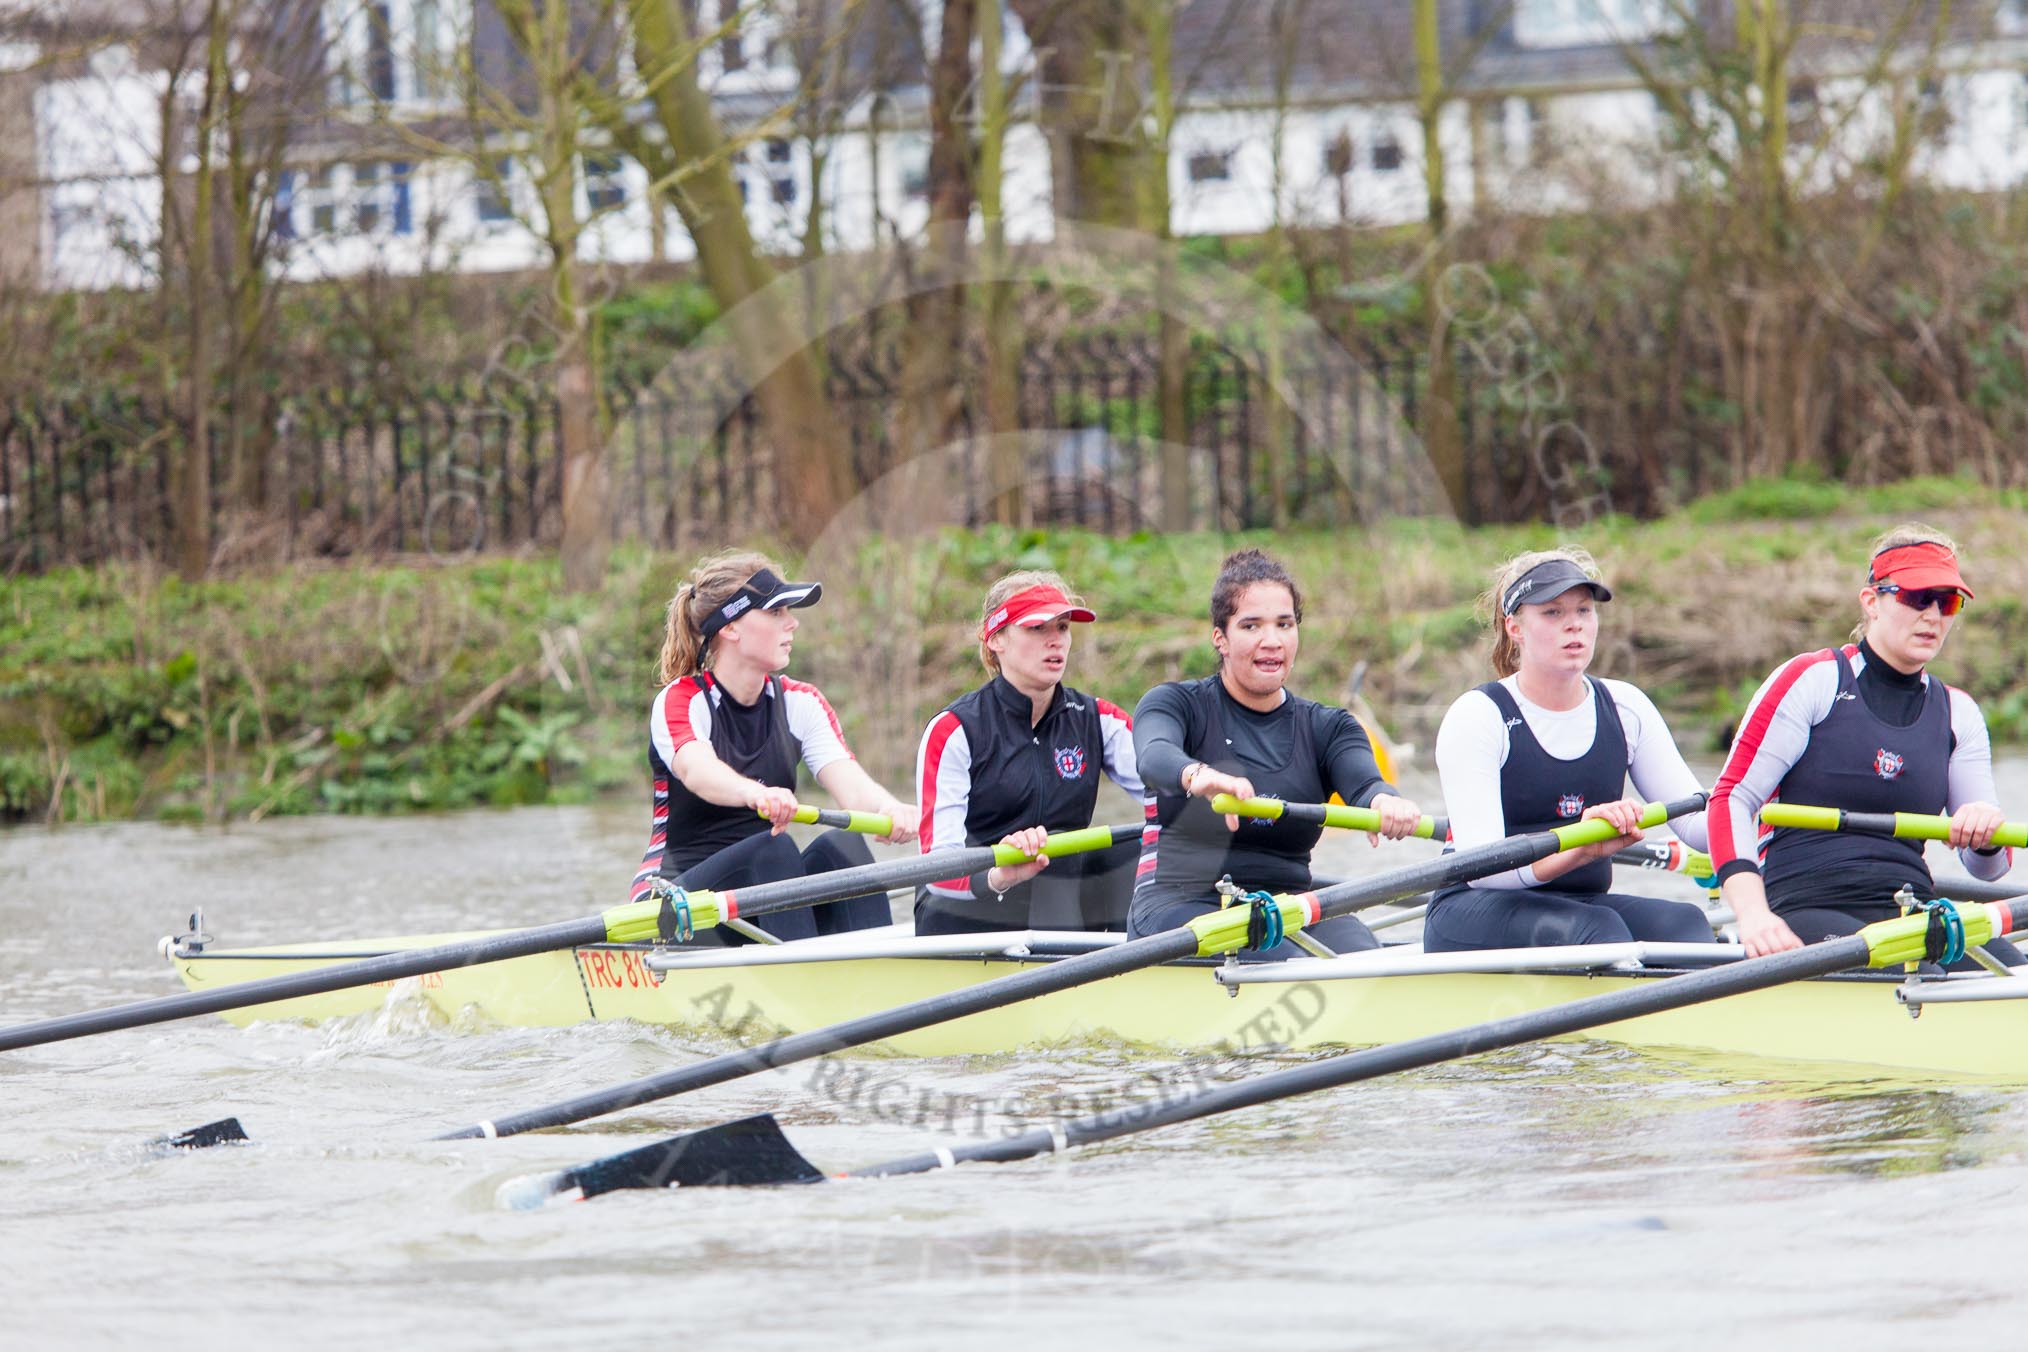 The Boat Race season 2014 - fixture CUWBC vs Thames RC.




on 02 March 2014 at 14:04, image #184